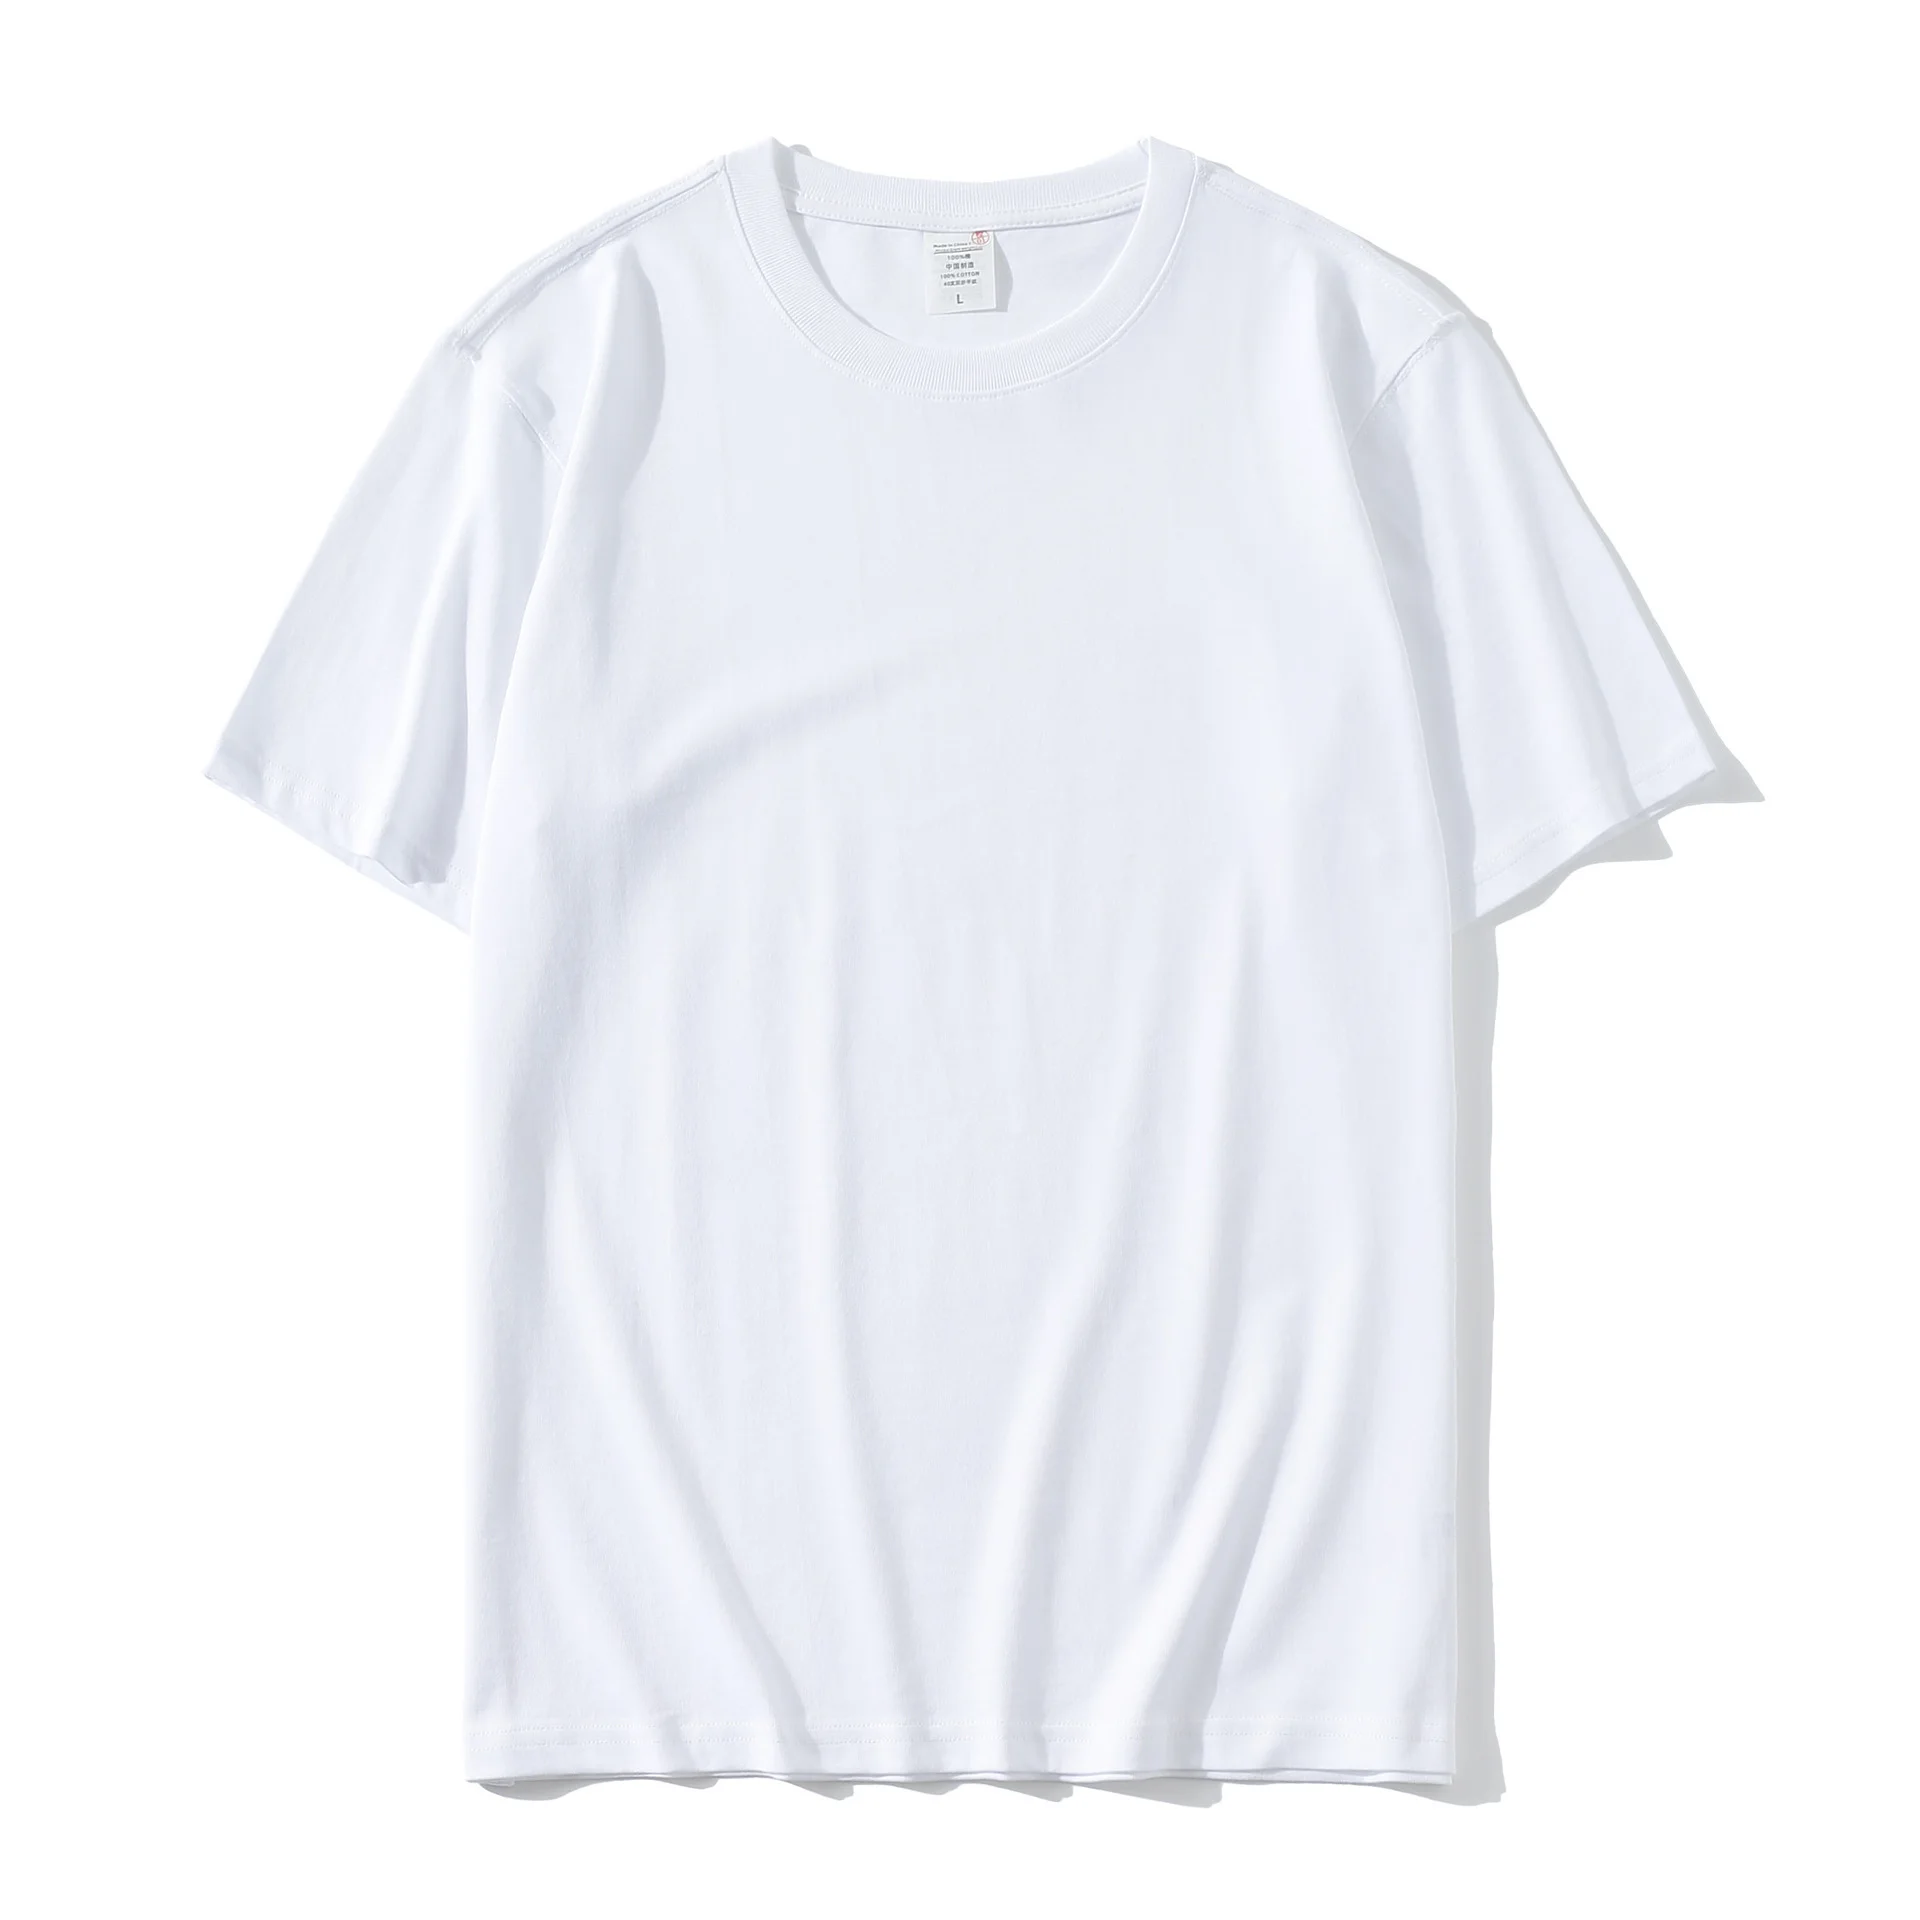 cut and sew blank t-shirts - Bangladesh Factory, Suppliers, Manufacturers